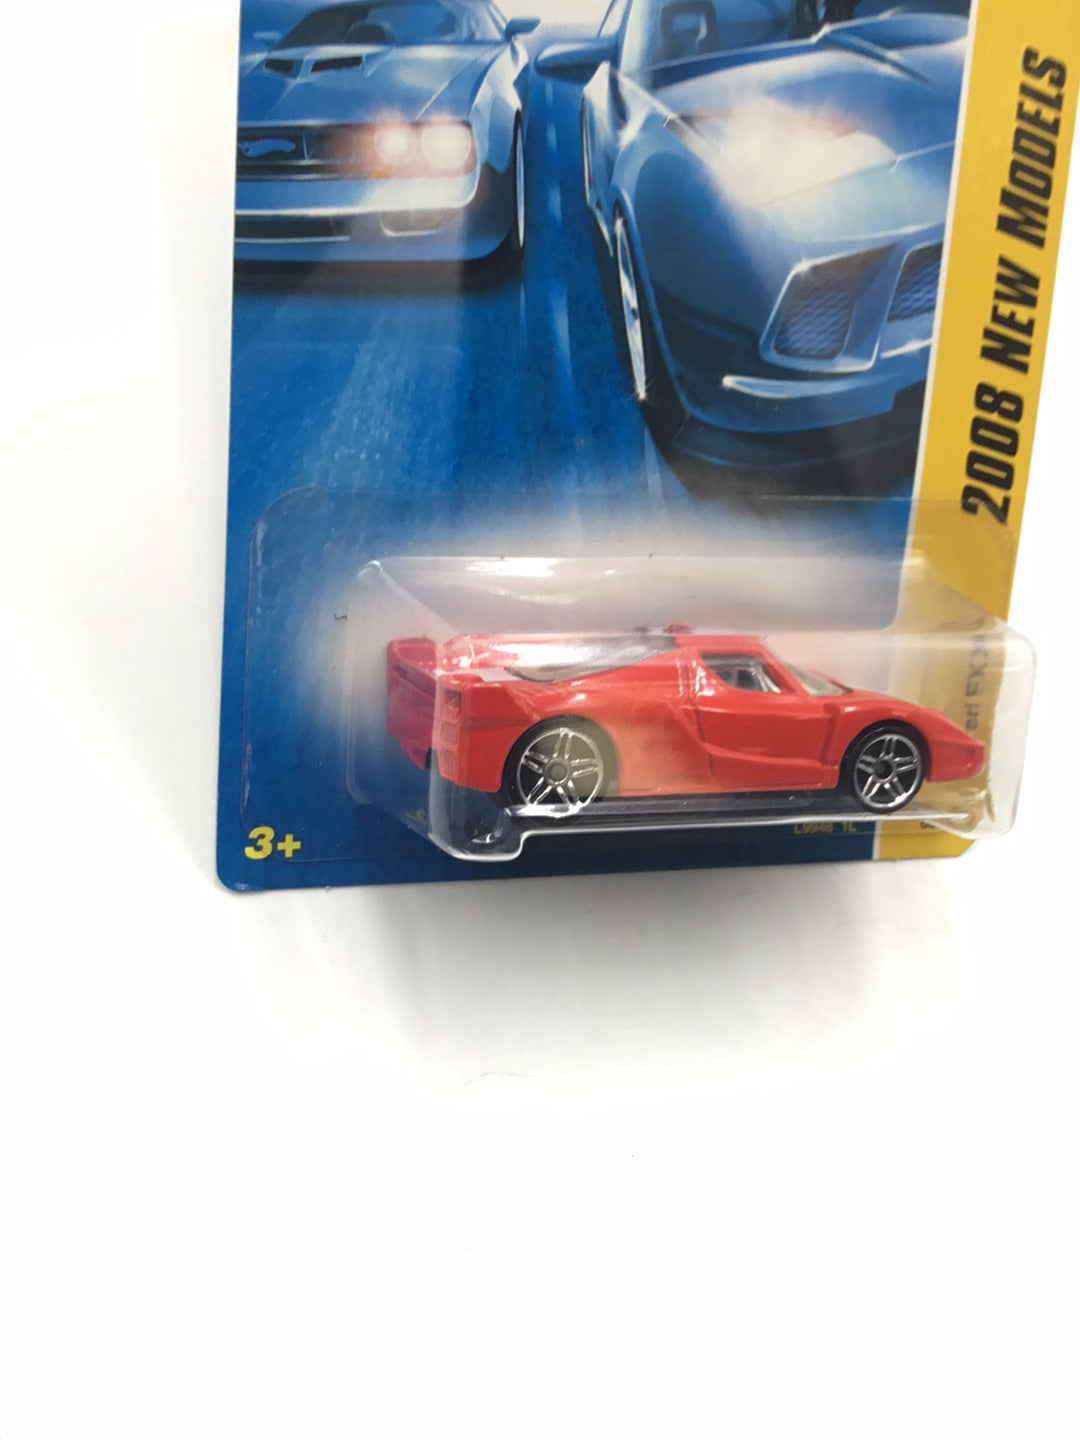 2008 Hot wheels #33 Ferrari FXX red with protector